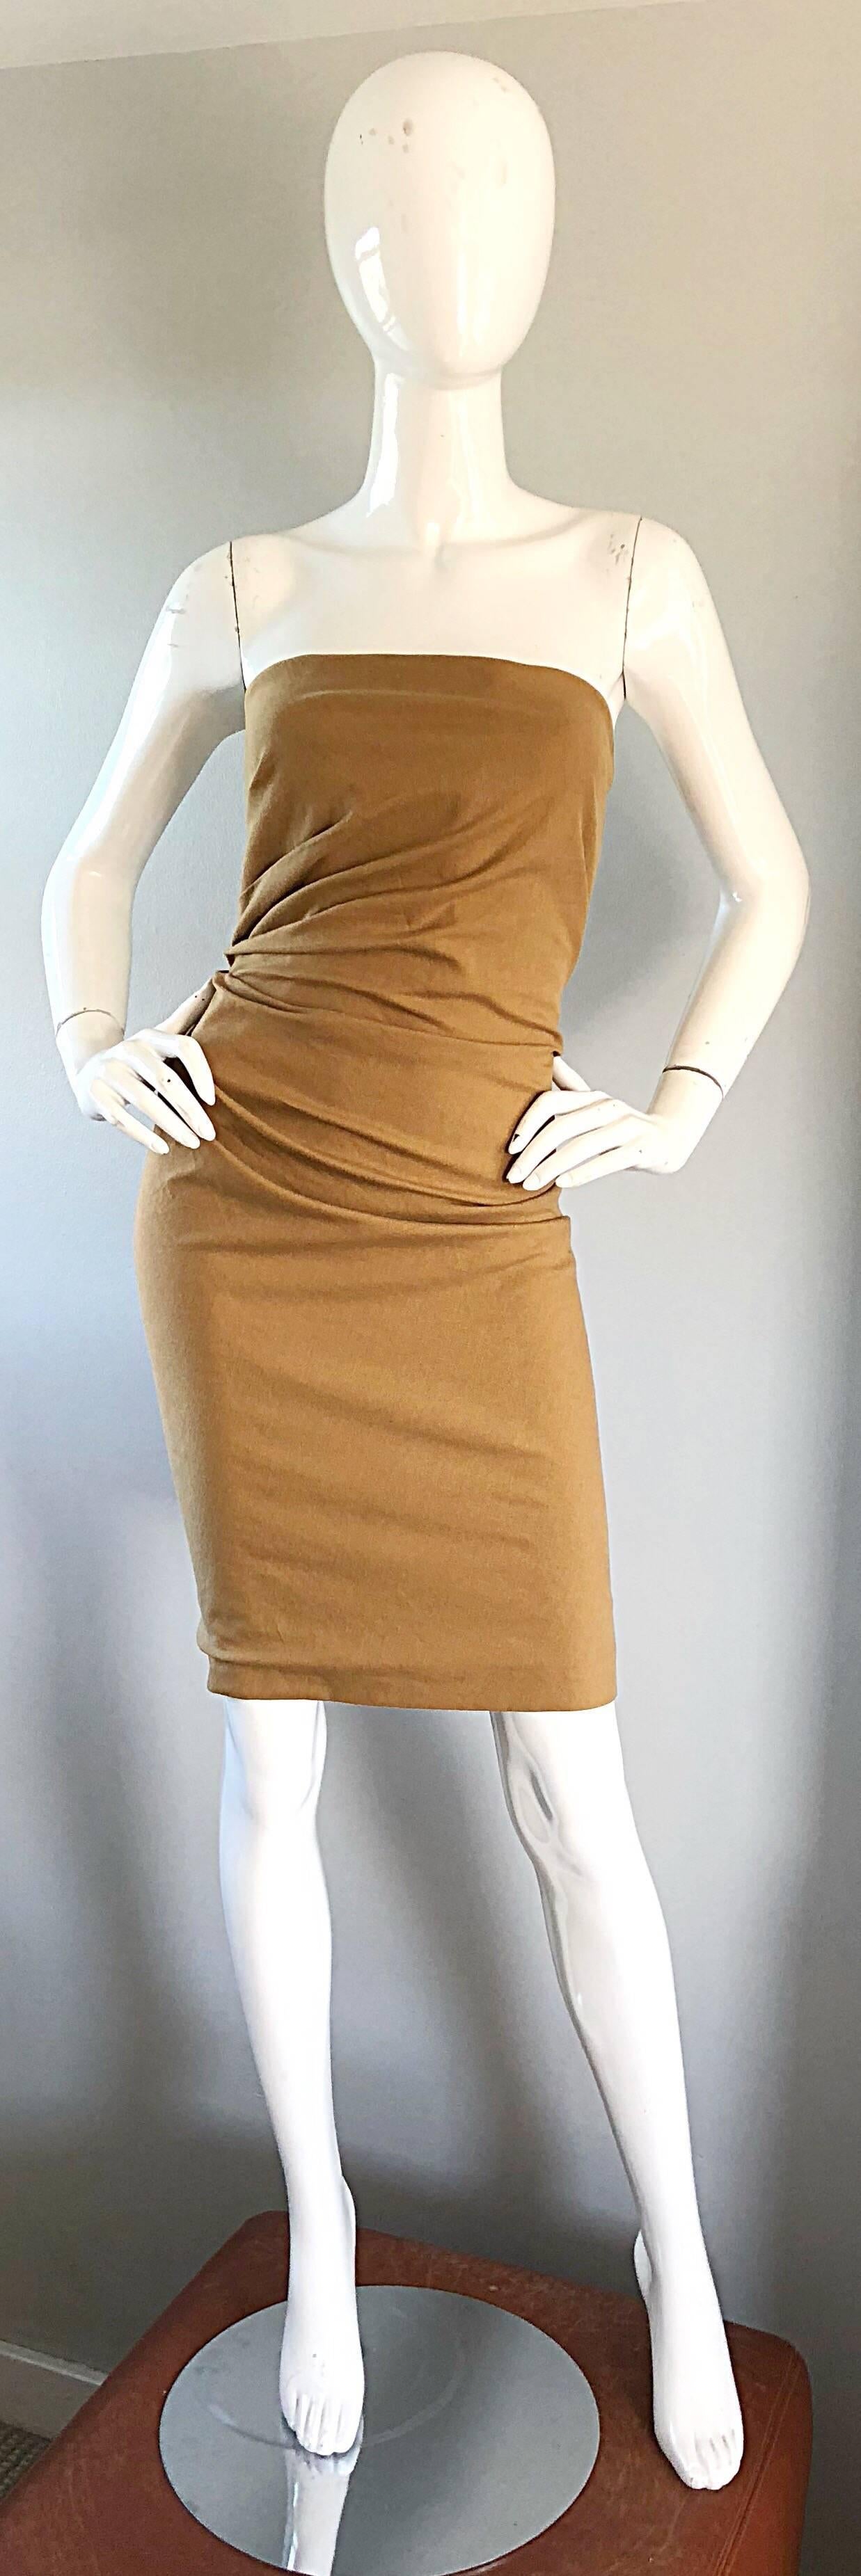 Gucci by Tom Ford Larger Size 48 12 1990s Tan Camel Cage Back 90s Vintage Dress  For Sale 3